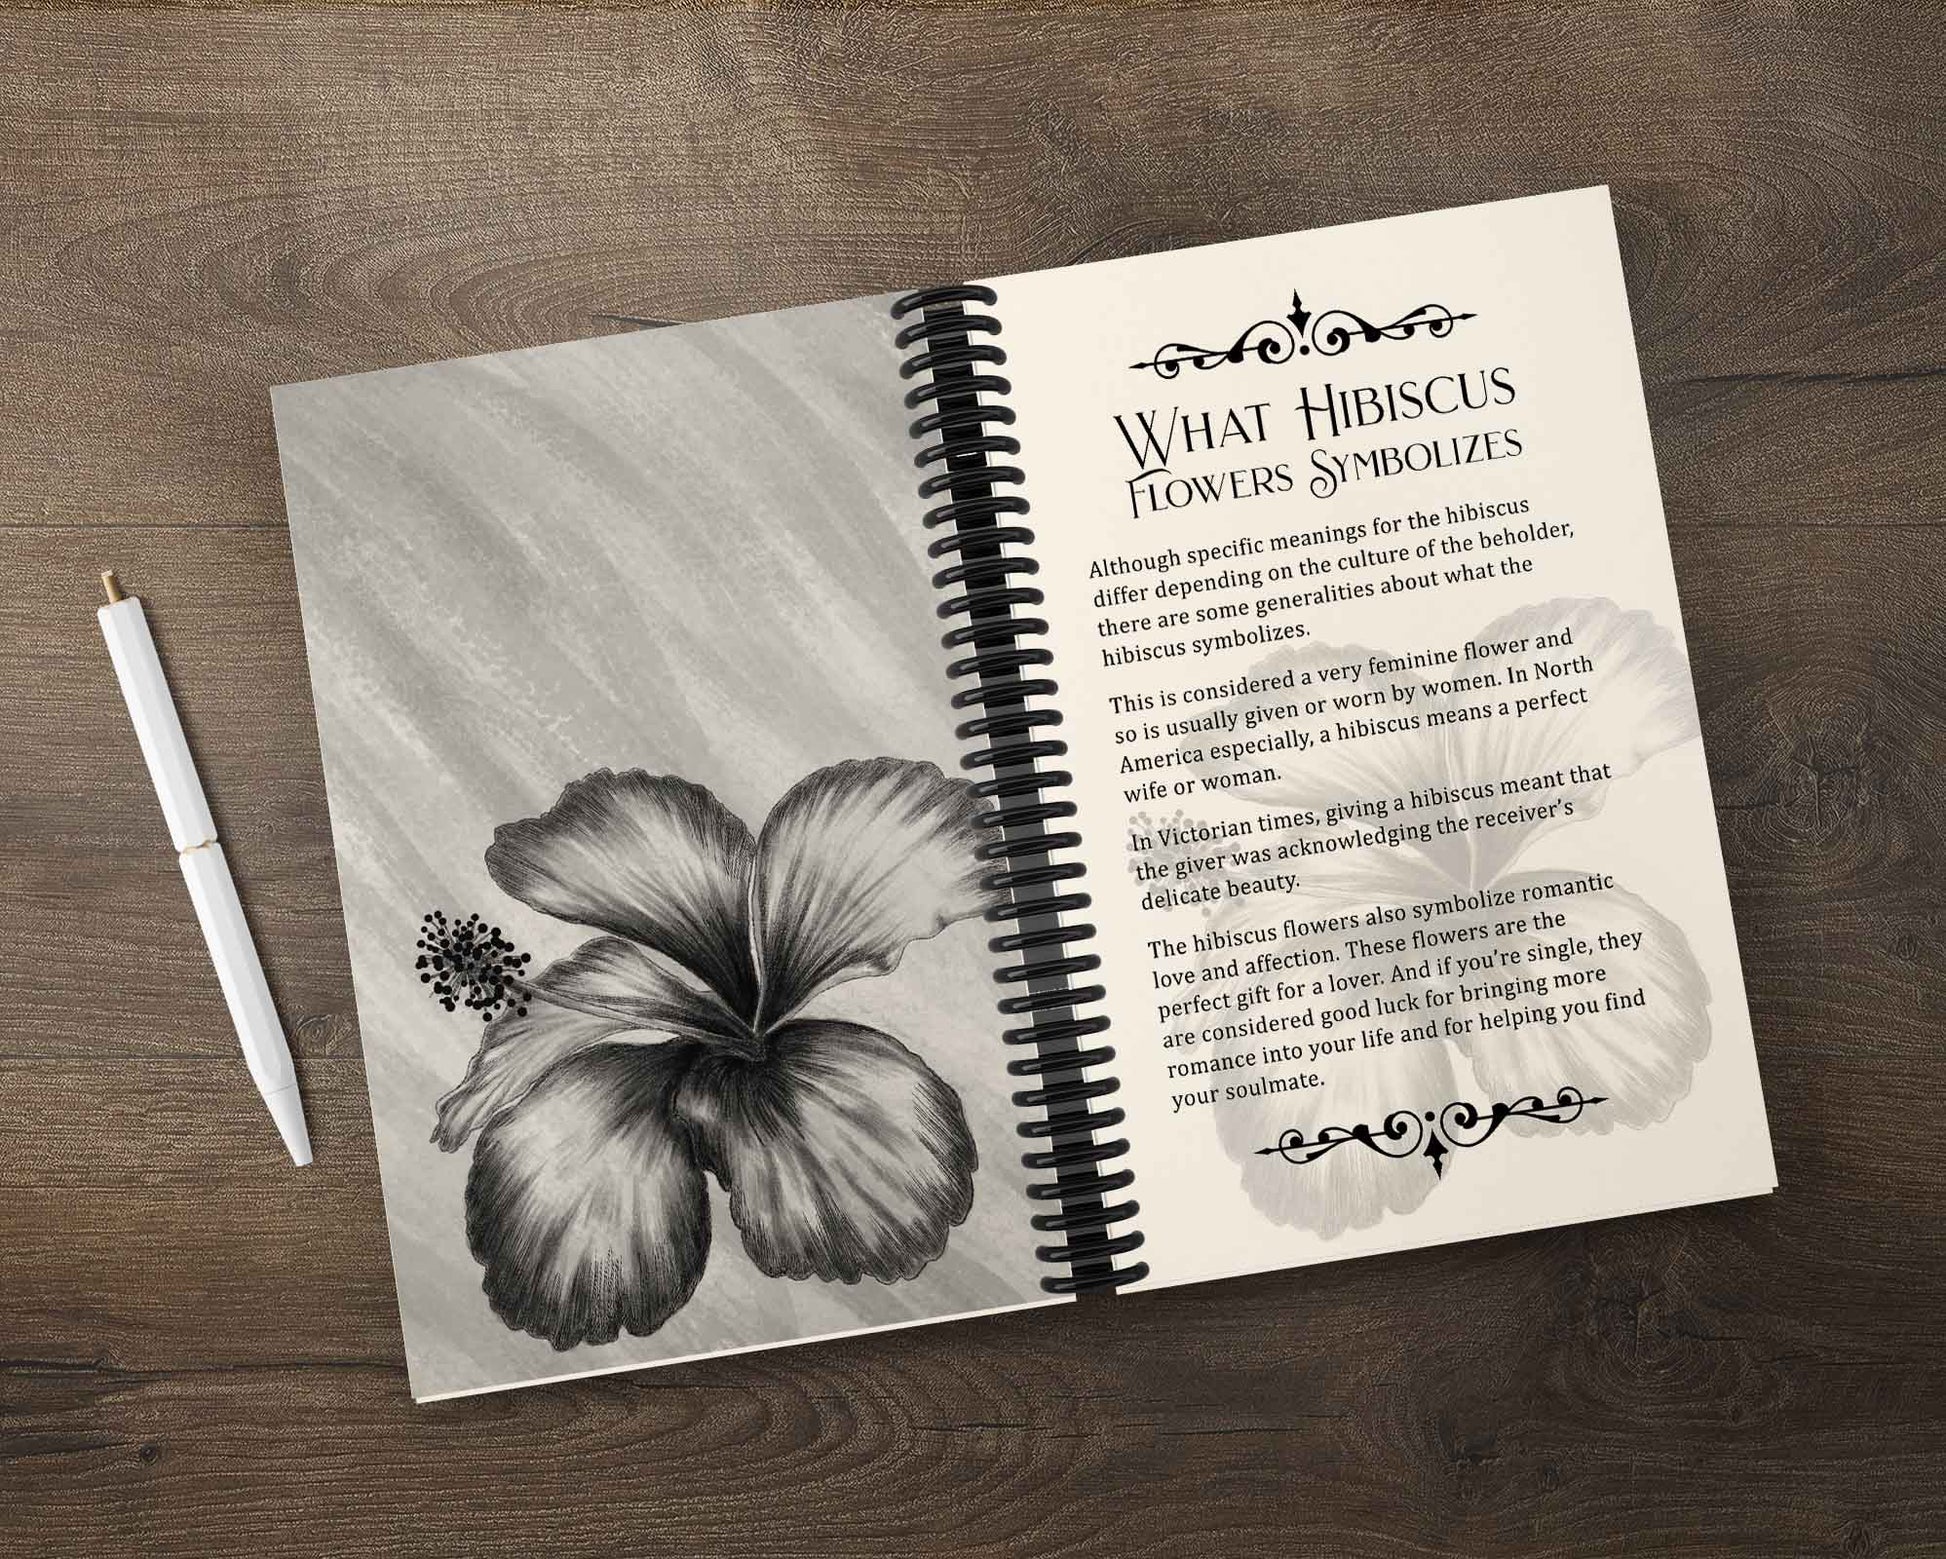 A Look Inside The Hibiscus Flowers Daily Life Journal 2